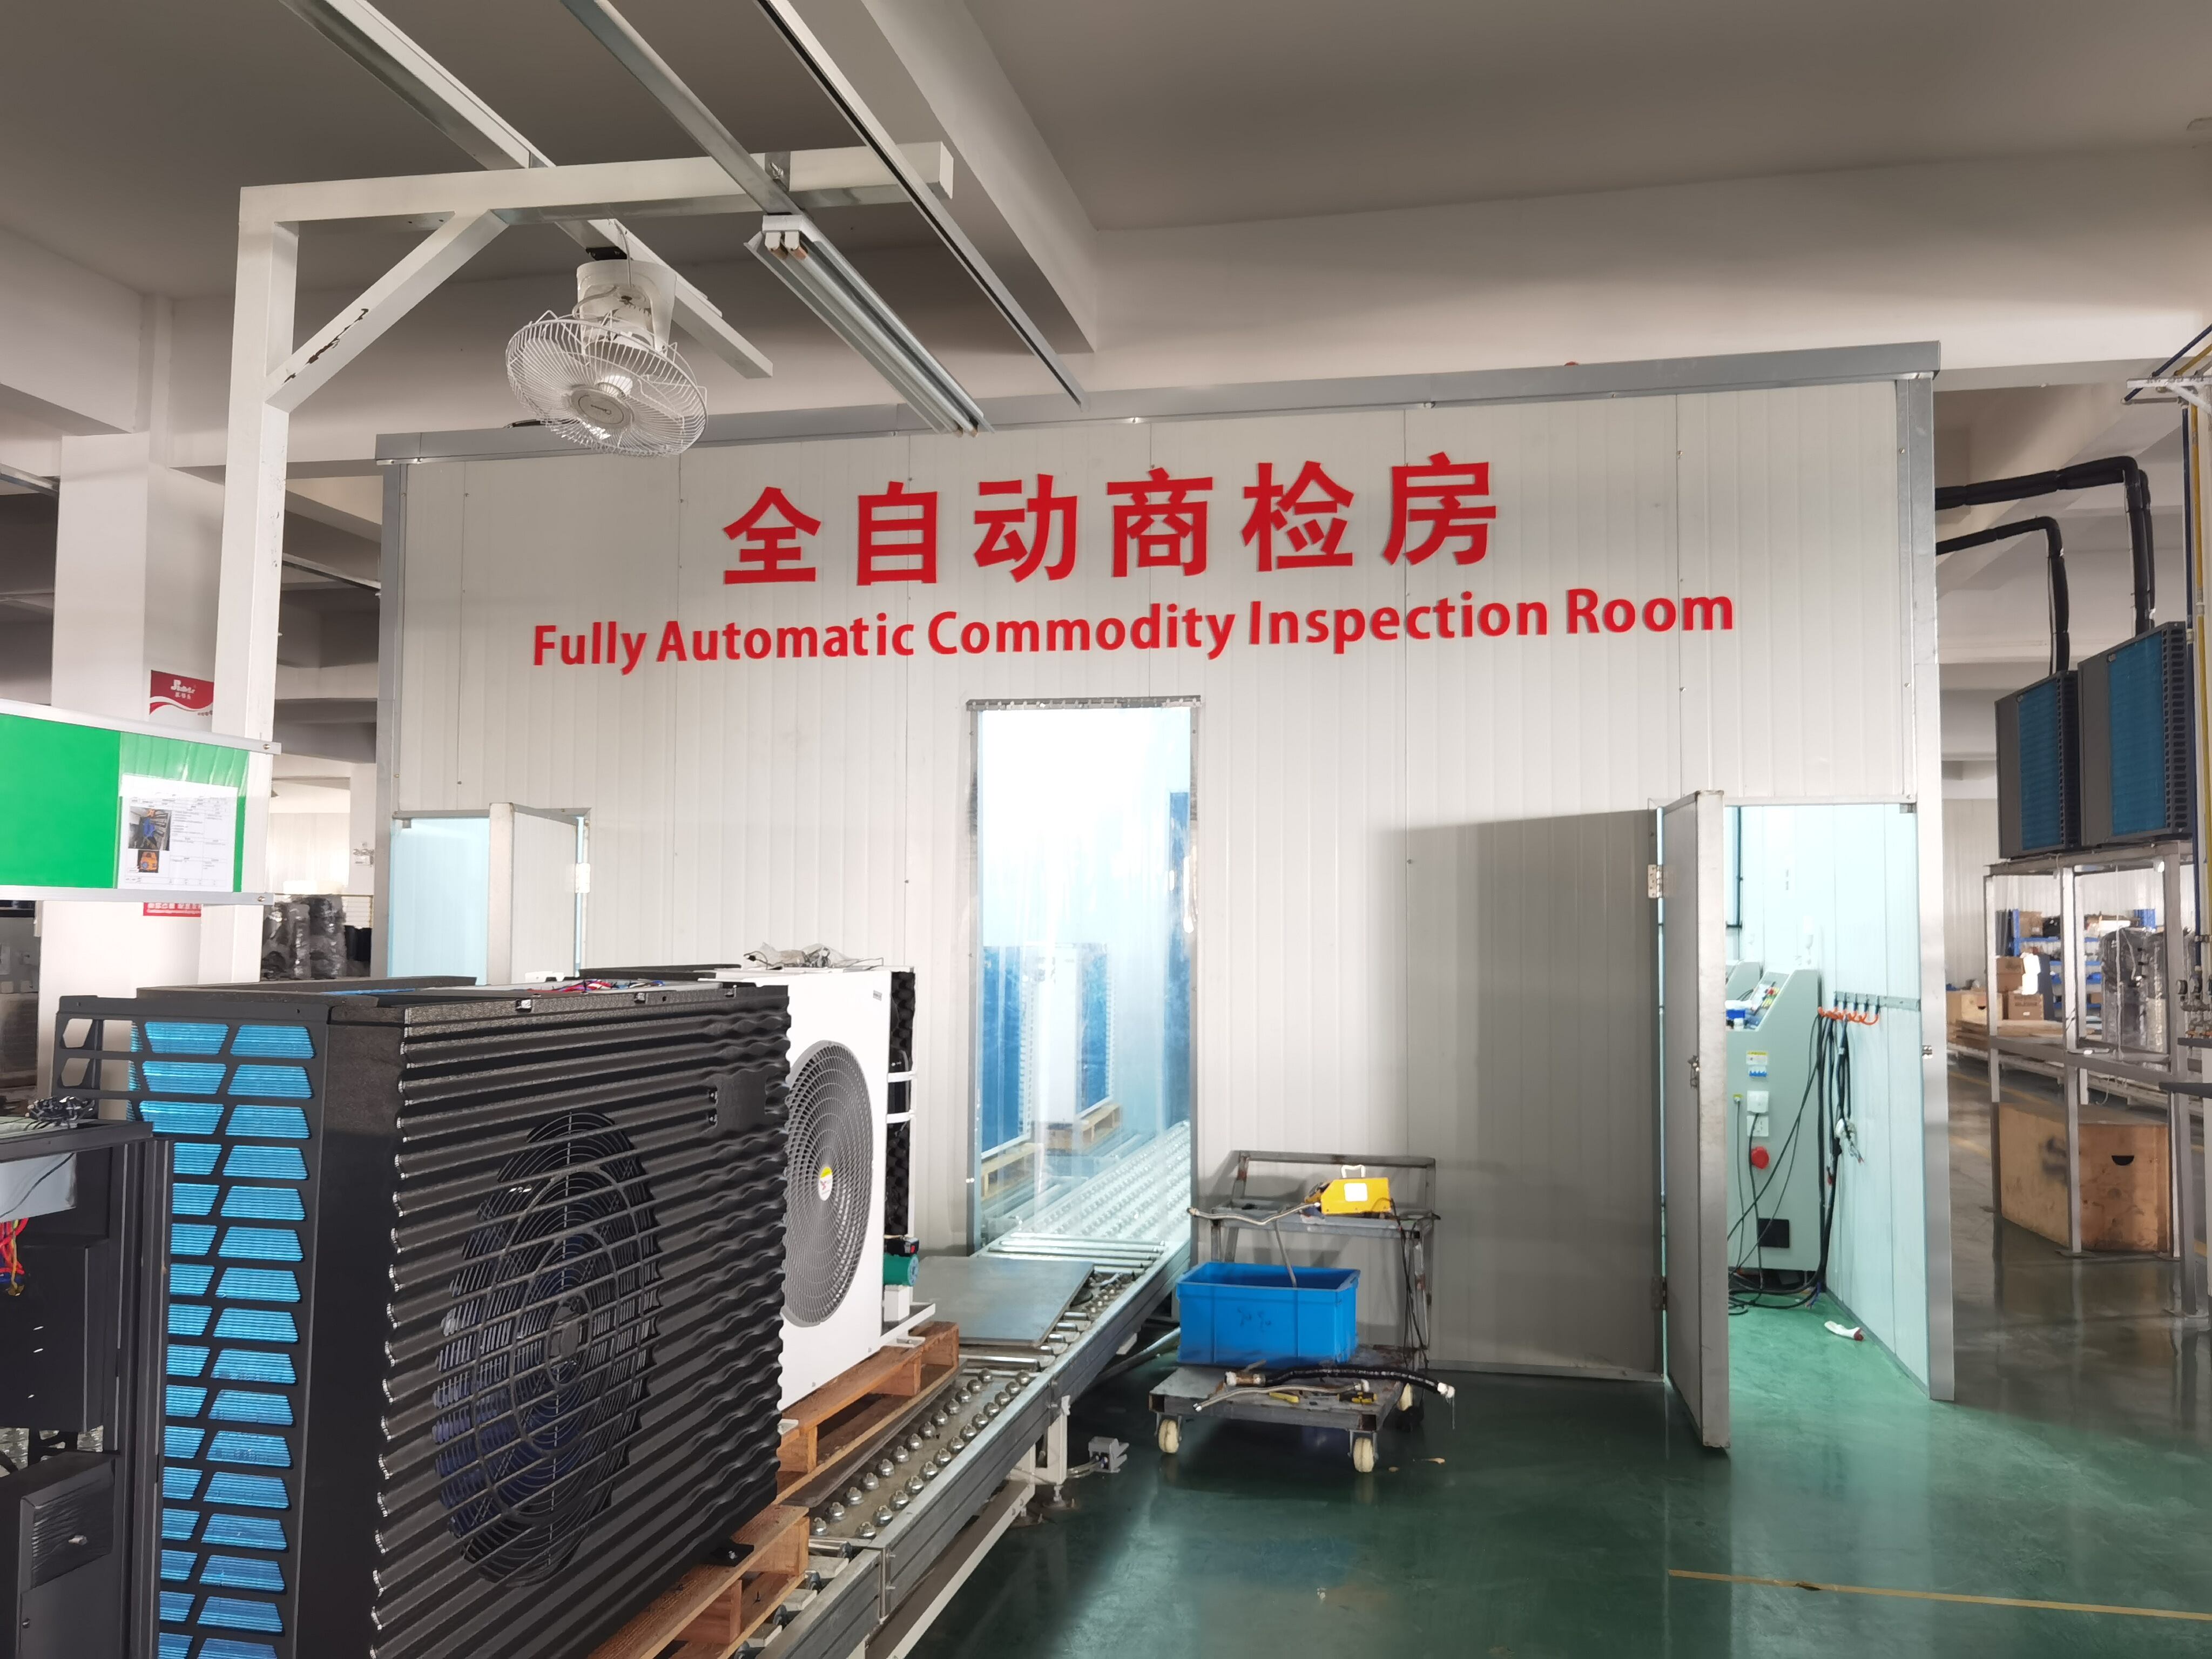 Fully Automatic Commodity Inspection Room